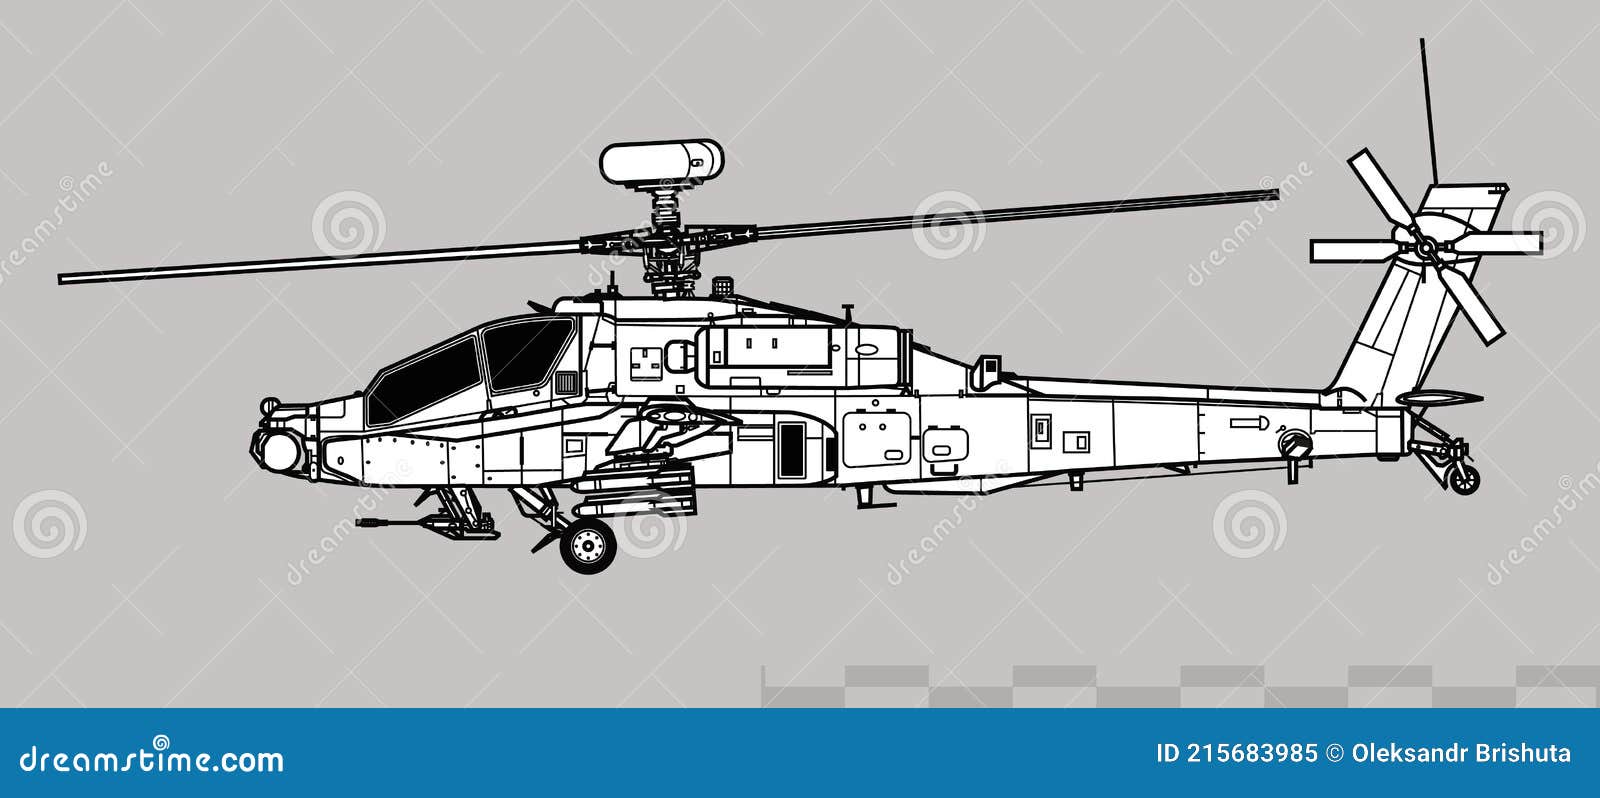 boeing ah-64d apache longbow, agustawestland apache.  drawing of attack helicopter.